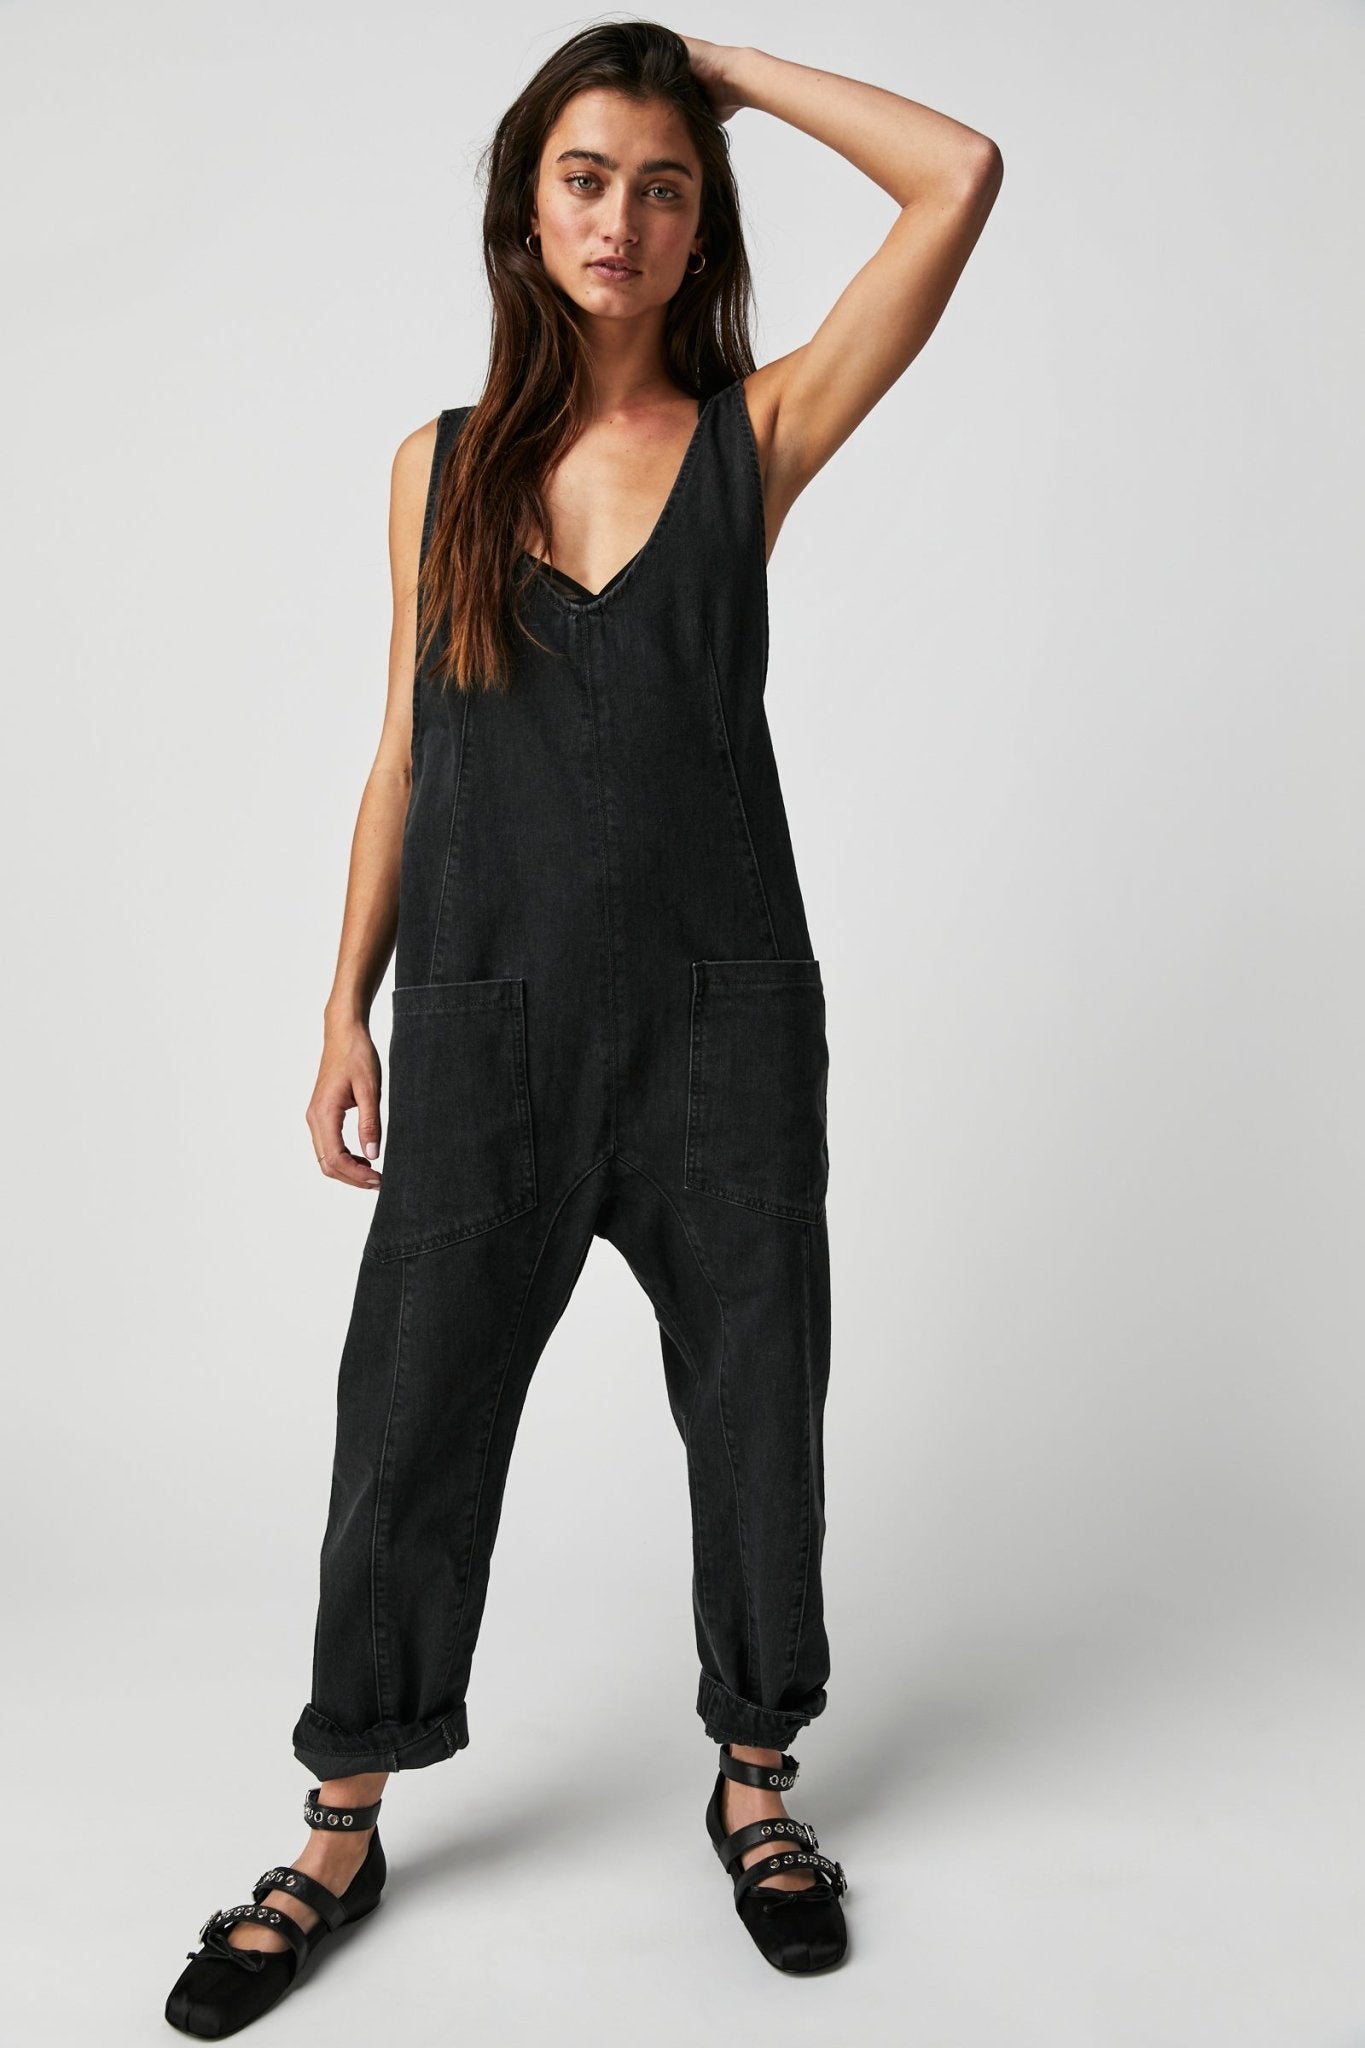 High Roller Jumpsuit by Free People - Mineral Black - Blue Sky Fashions & Lingerie